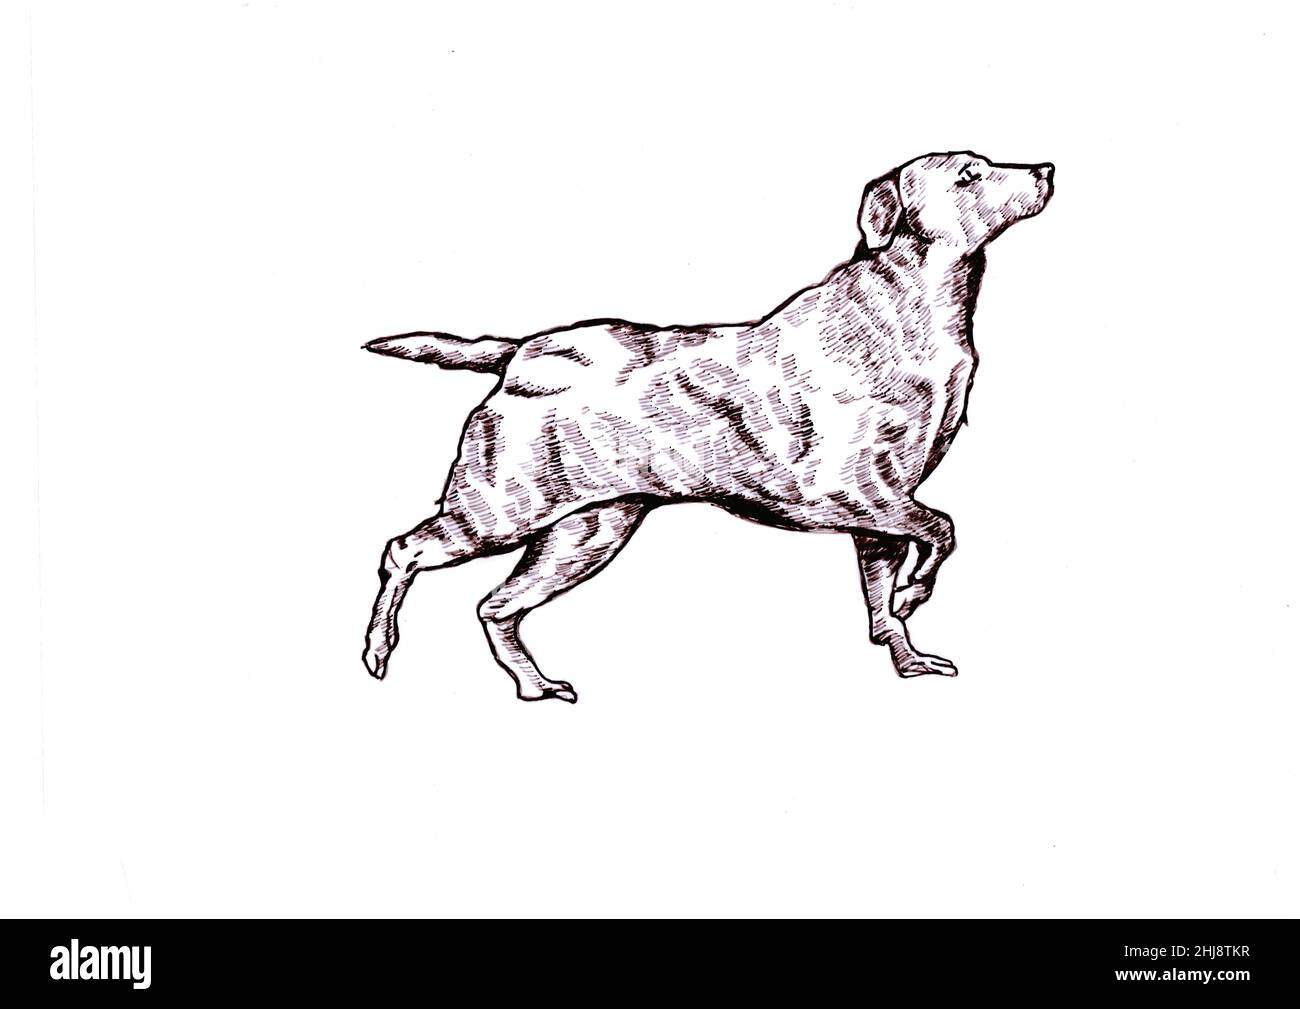 Sketch of a dog walking on a white background. Stock Photo